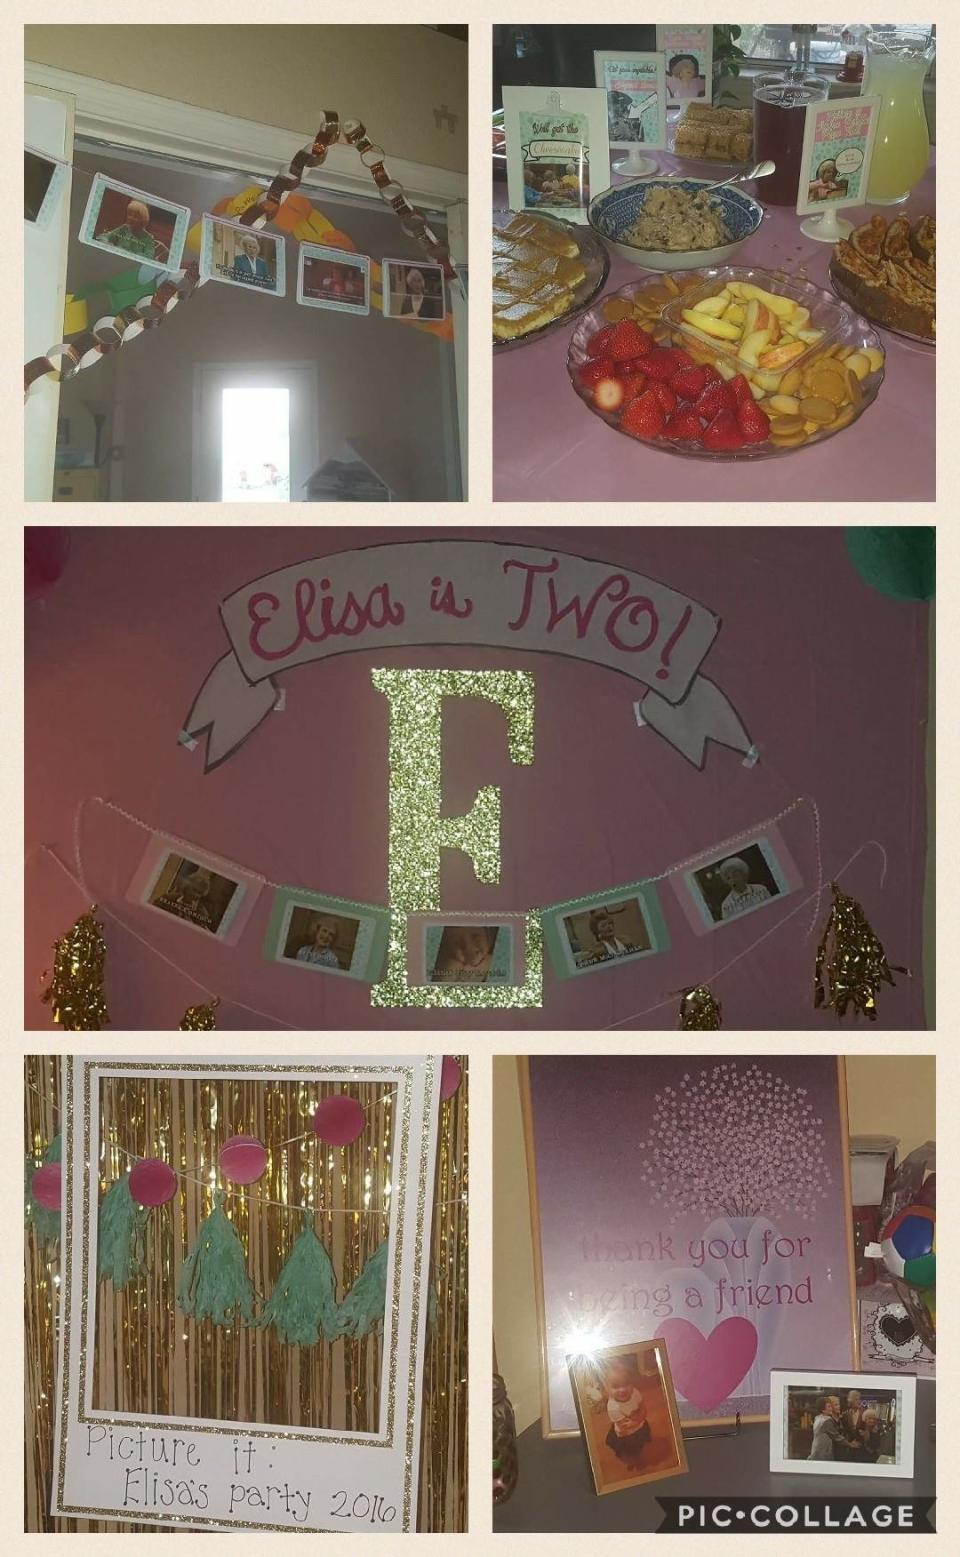 Jessica Lewis&rsquo; daughter Elisa has always loved &ldquo;The Golden Girls,&rdquo; so it made for the perfect <a href="http://www.huffingtonpost.com/entry/golden-girls-themed-birthday-party-toddler_us_58f58897e4b0b9e9848defc5">birthday party theme</a>.&nbsp;